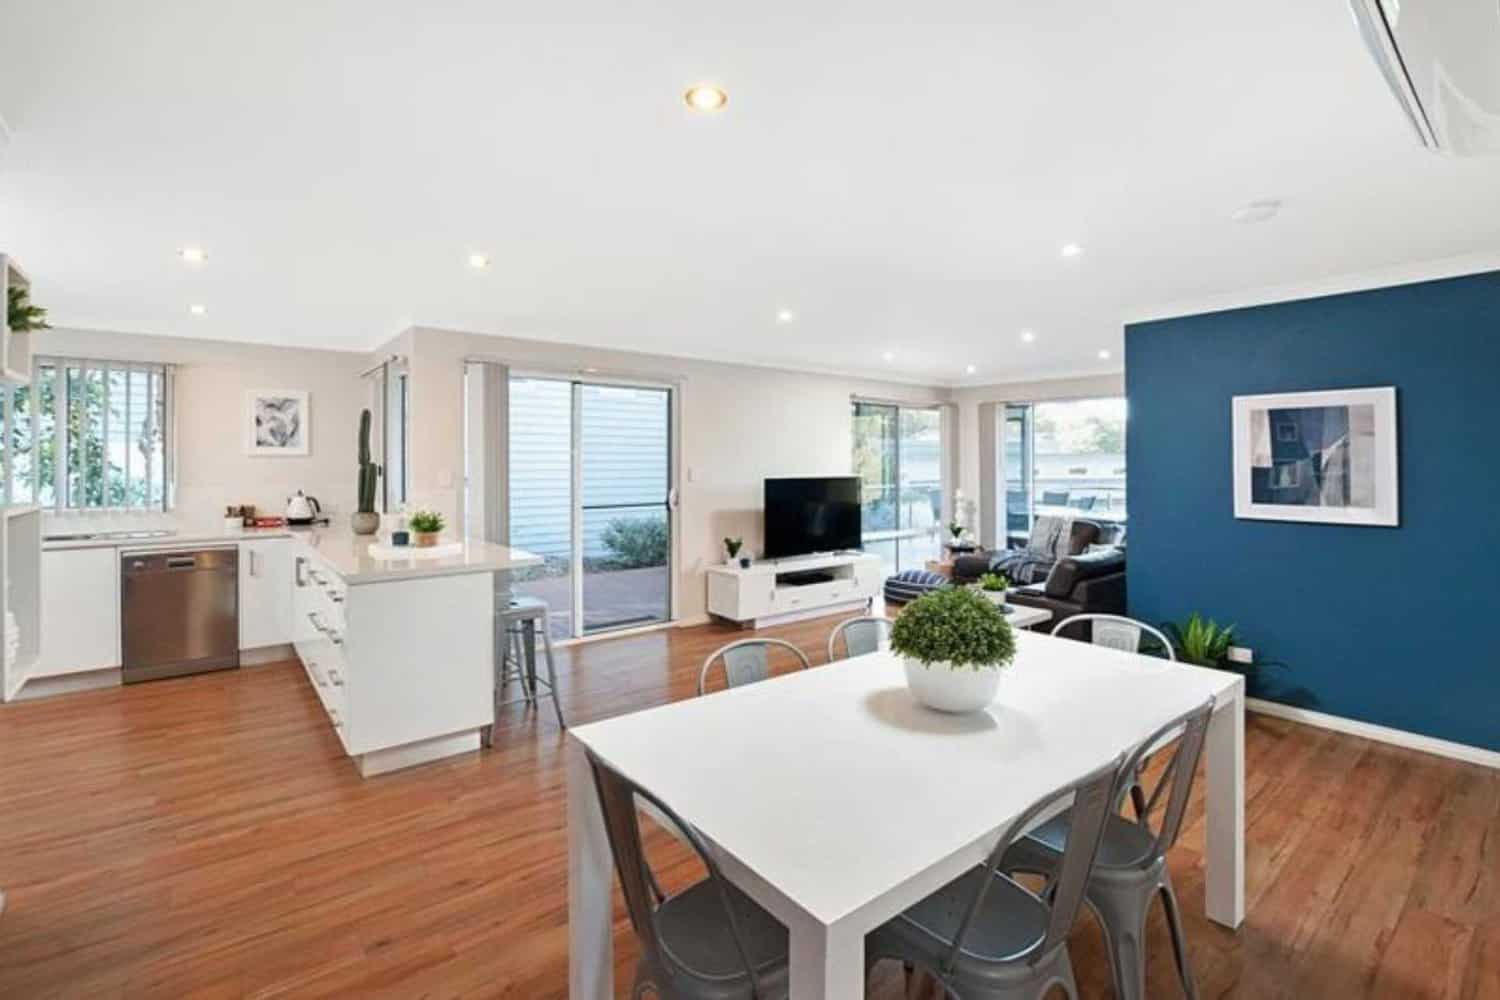 Open plan living area at Forest View, luxury accommodation Dunsborough WA